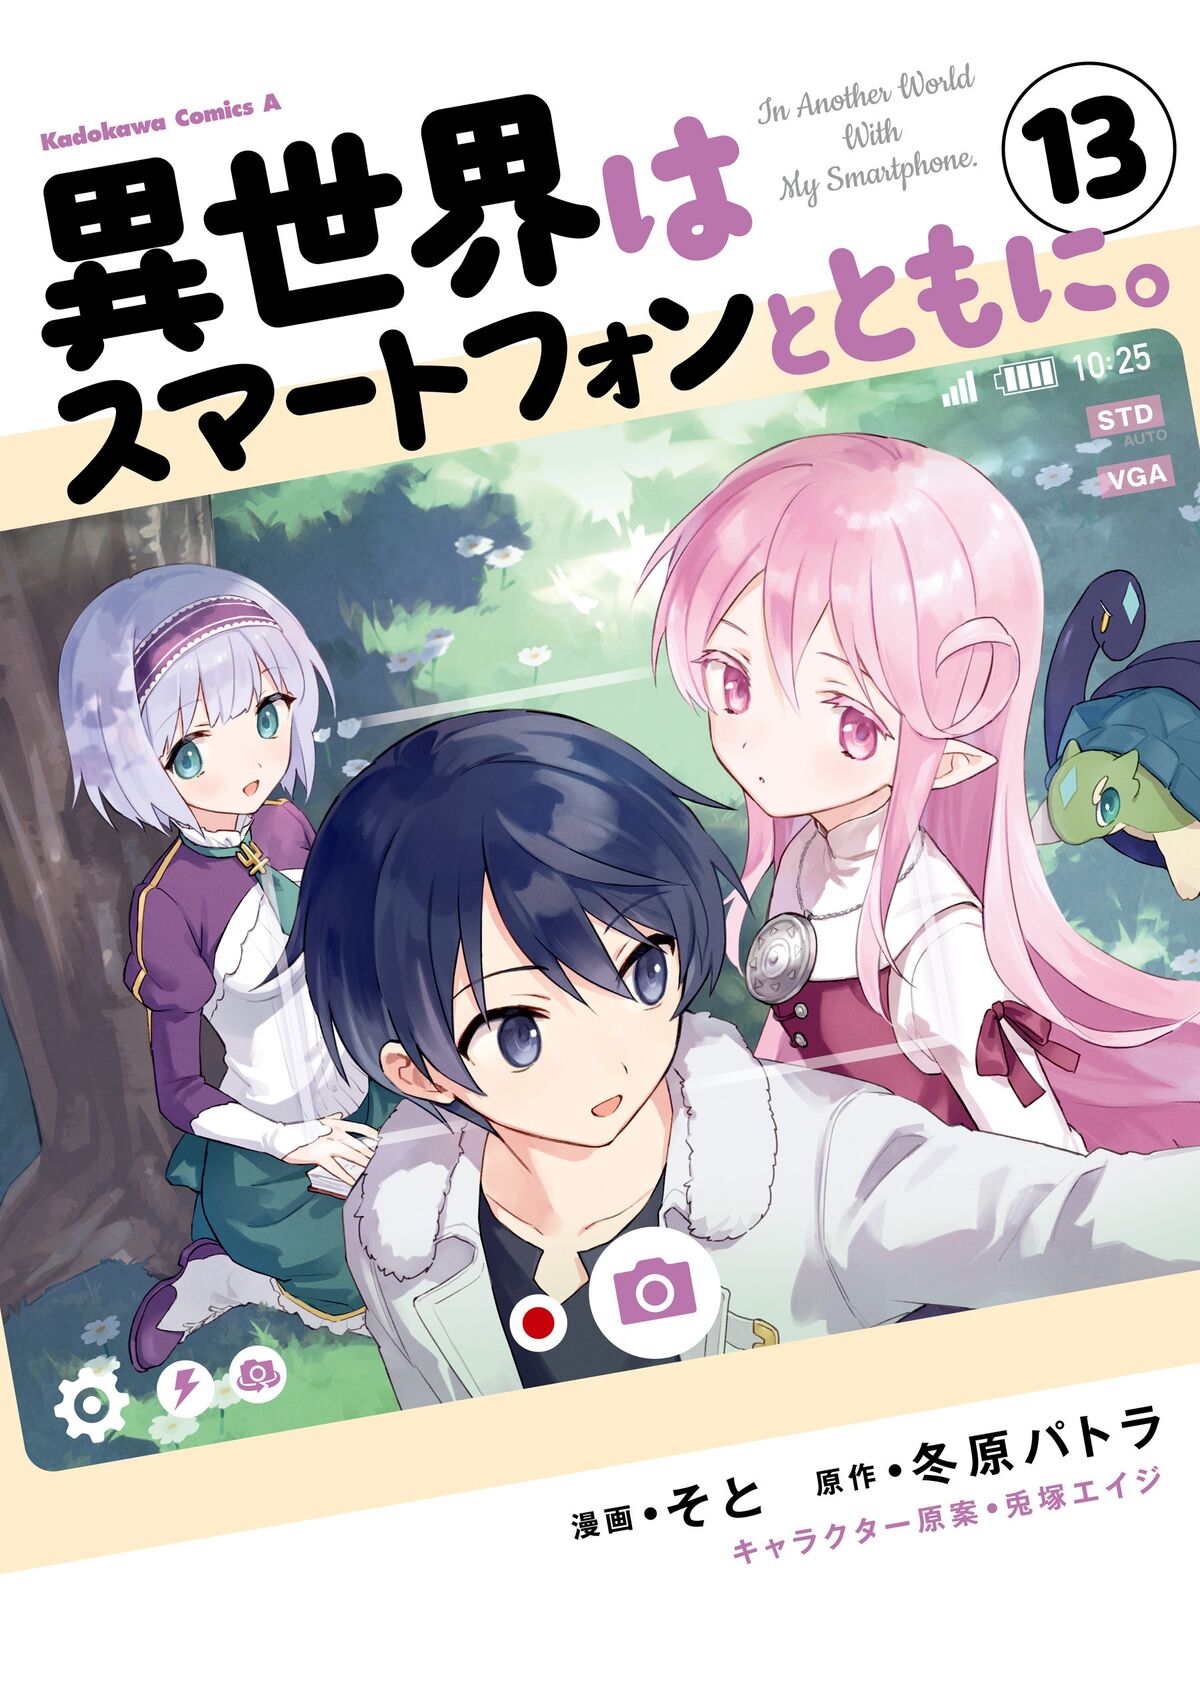 Manga Chapter 3, In Another World With My Smartphone Wiki